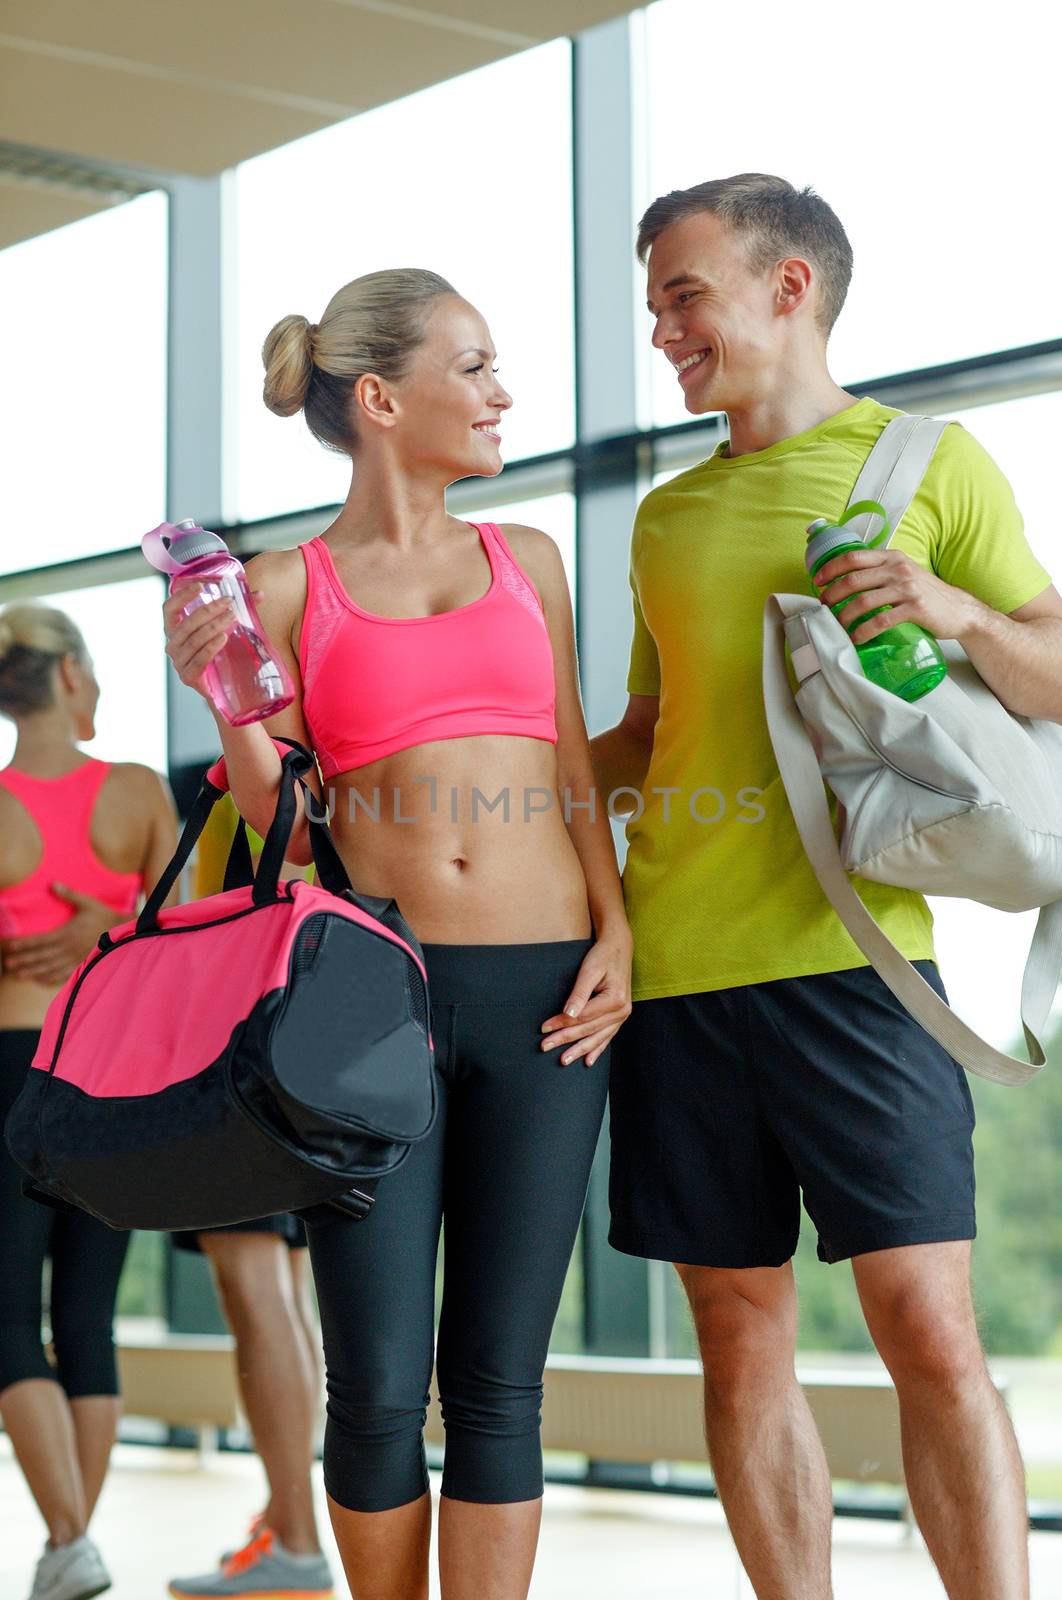 smiling couple with water bottles in gym by dolgachov